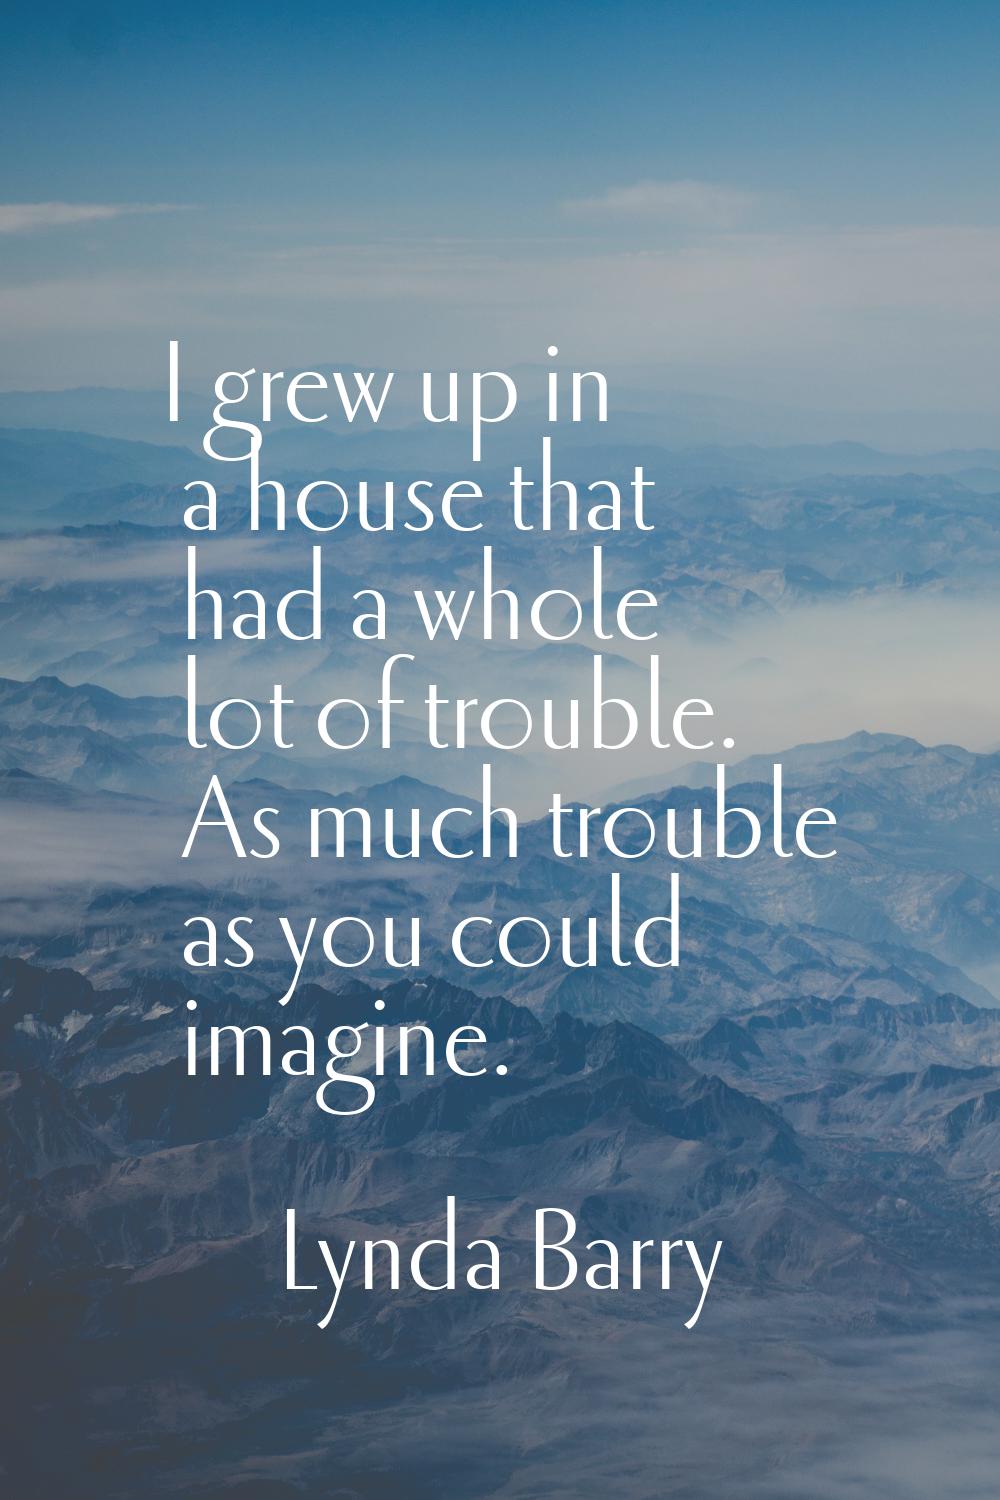 I grew up in a house that had a whole lot of trouble. As much trouble as you could imagine.